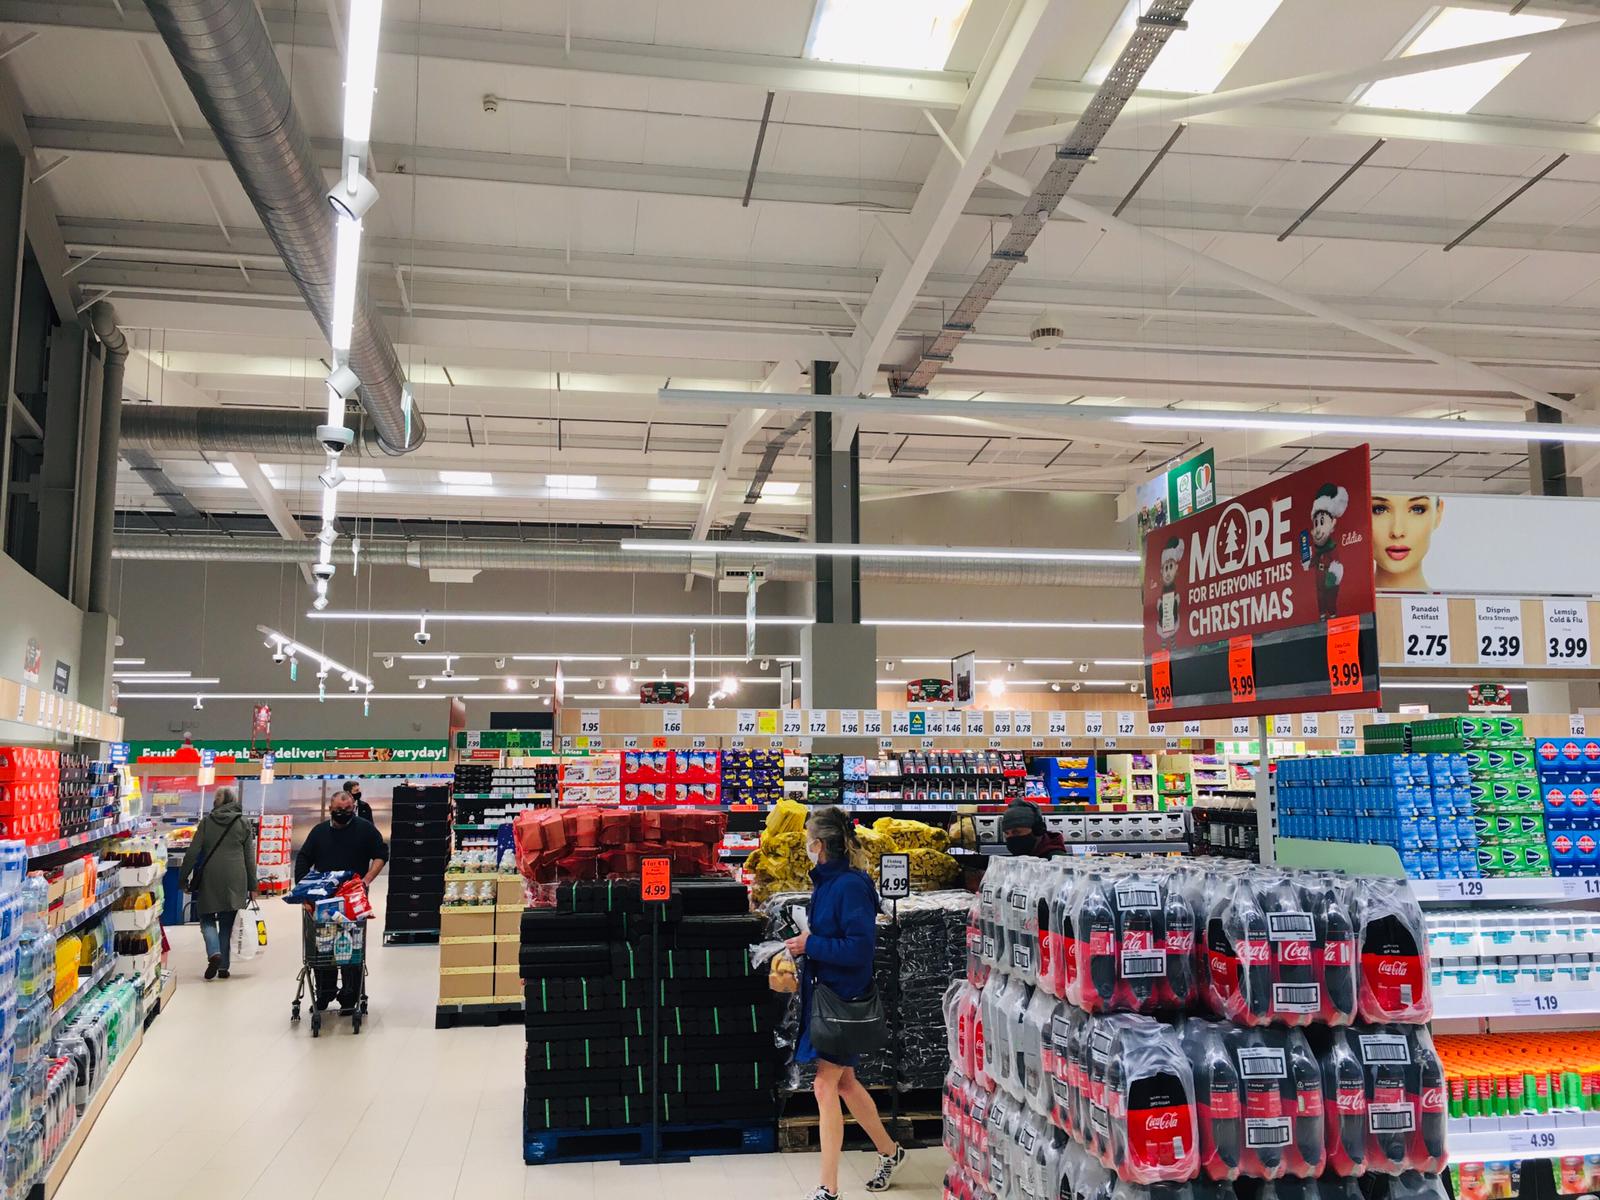 M&E Contract Completed for Lidl Wellpark Galway